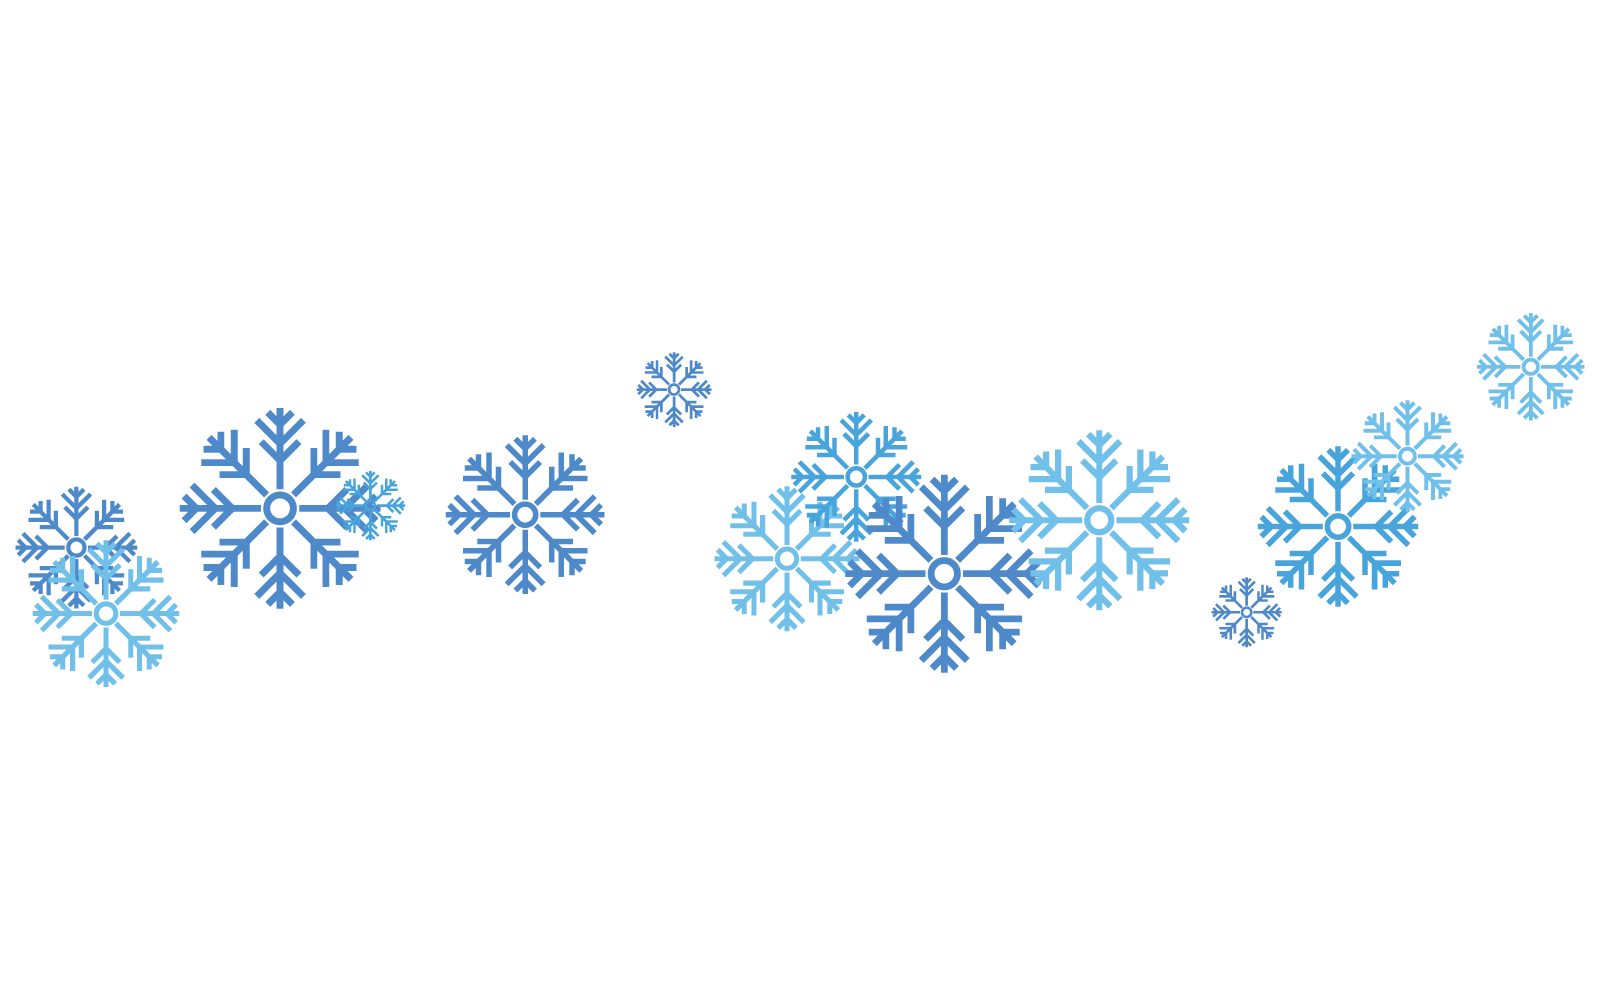 Snowflakes for background template illustration vector flat design